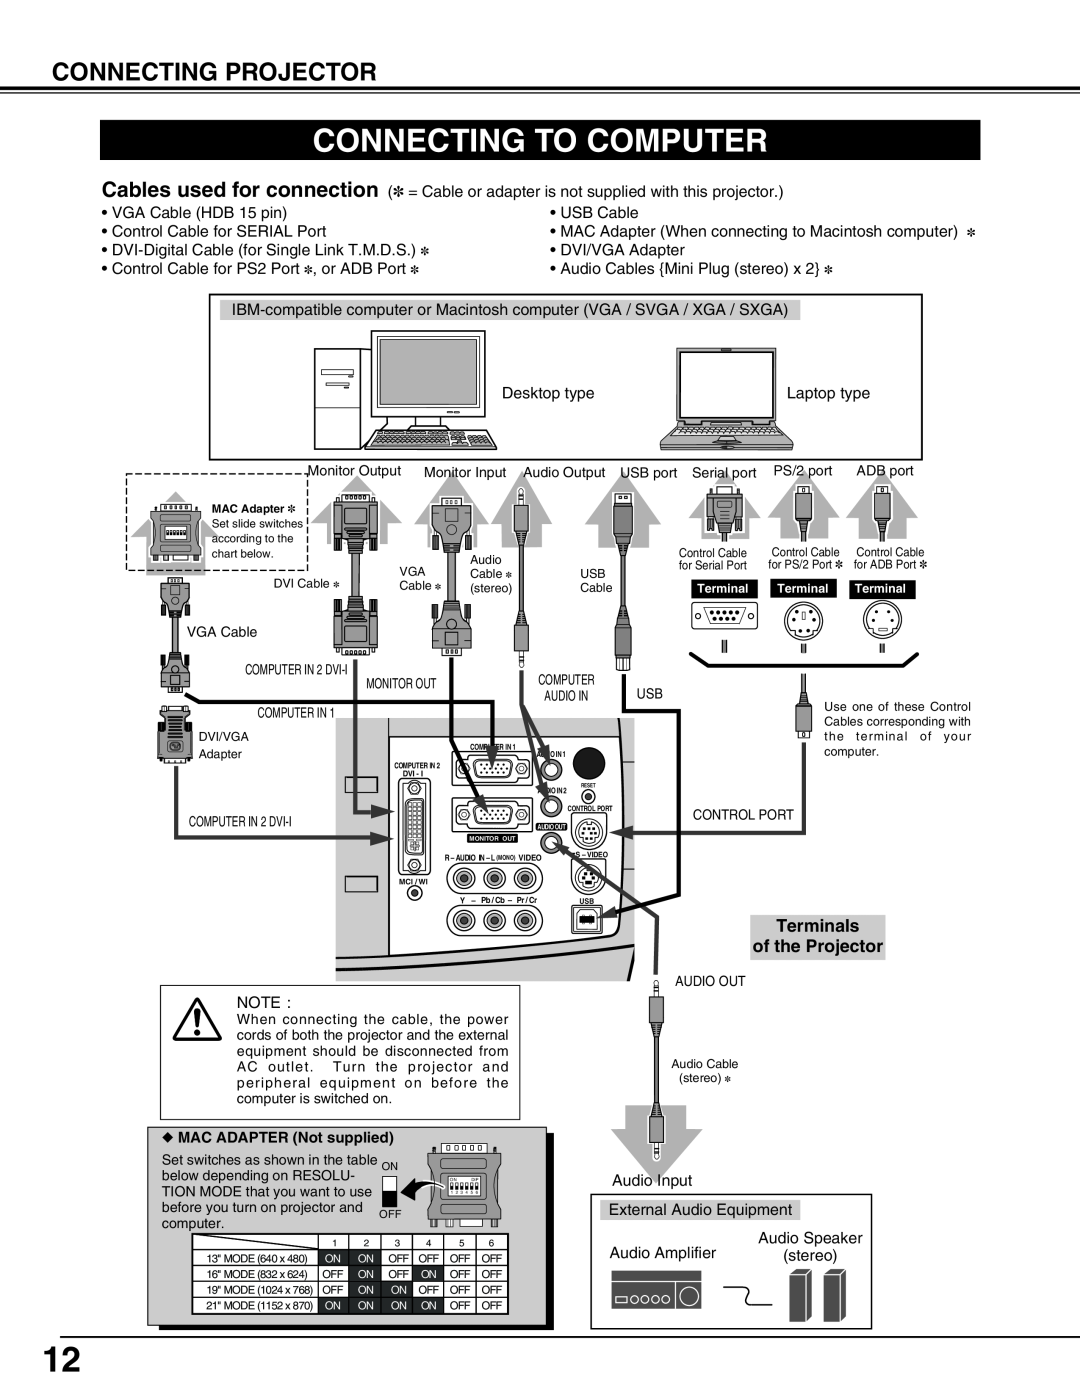 Christie Digital Systems 38-VIV207-01 user manual Connecting To Computer, Connecting Projector, Terminals, of the Projector 